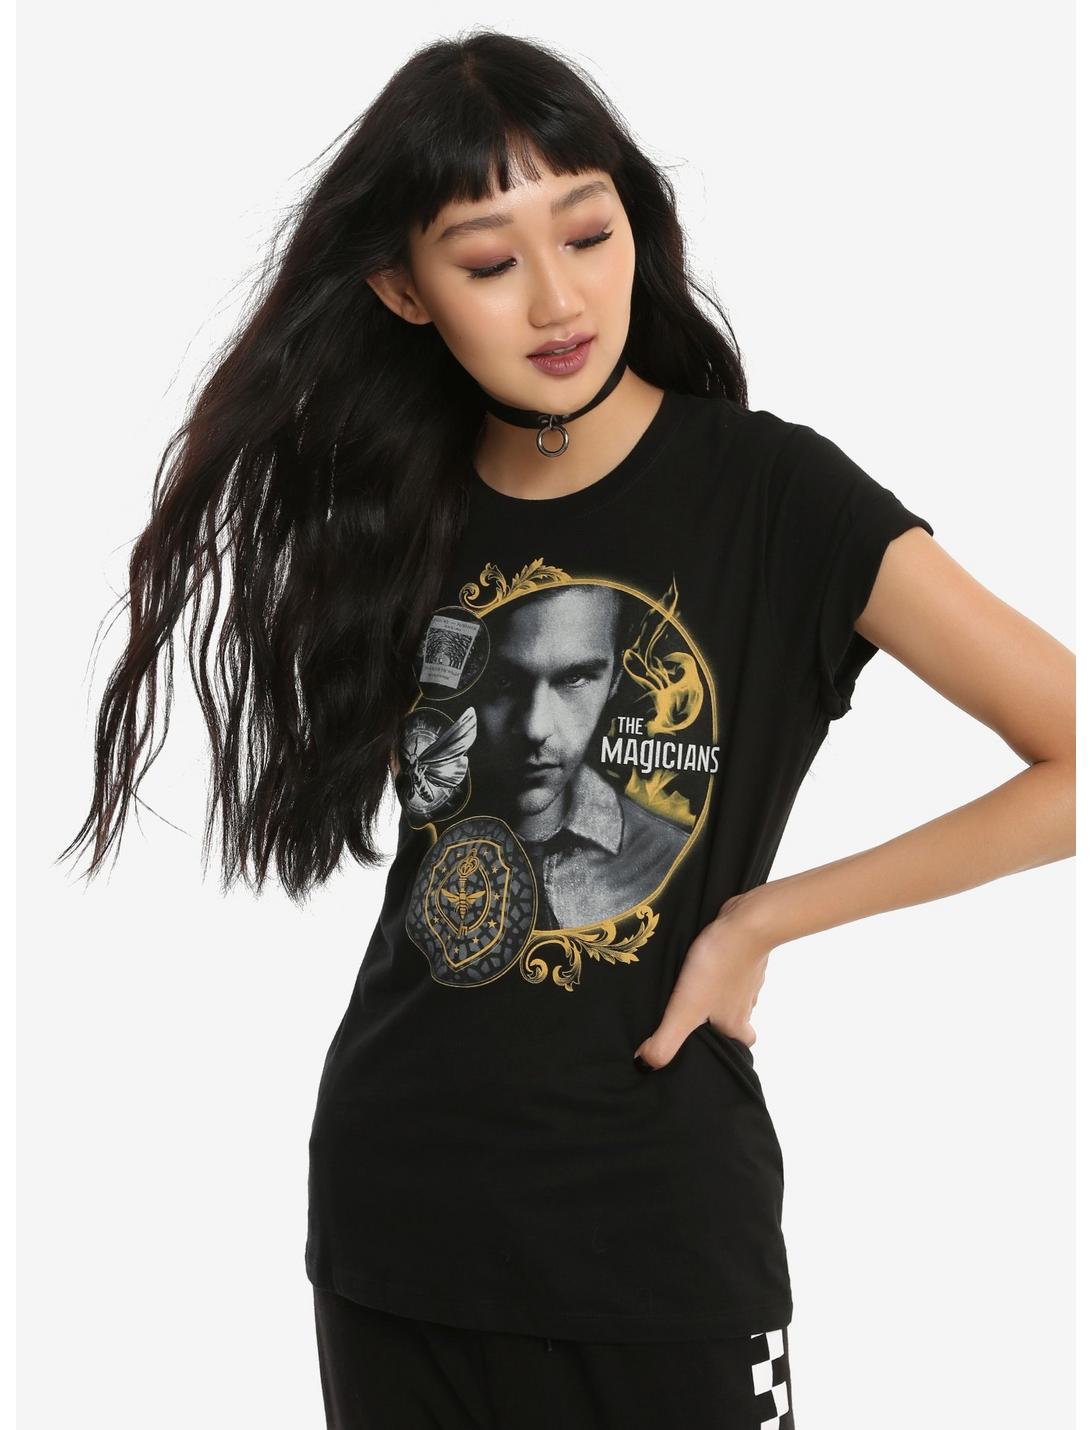 The Magicians Quentin Coldwater Girls T-Shirt, BLACK, hi-res